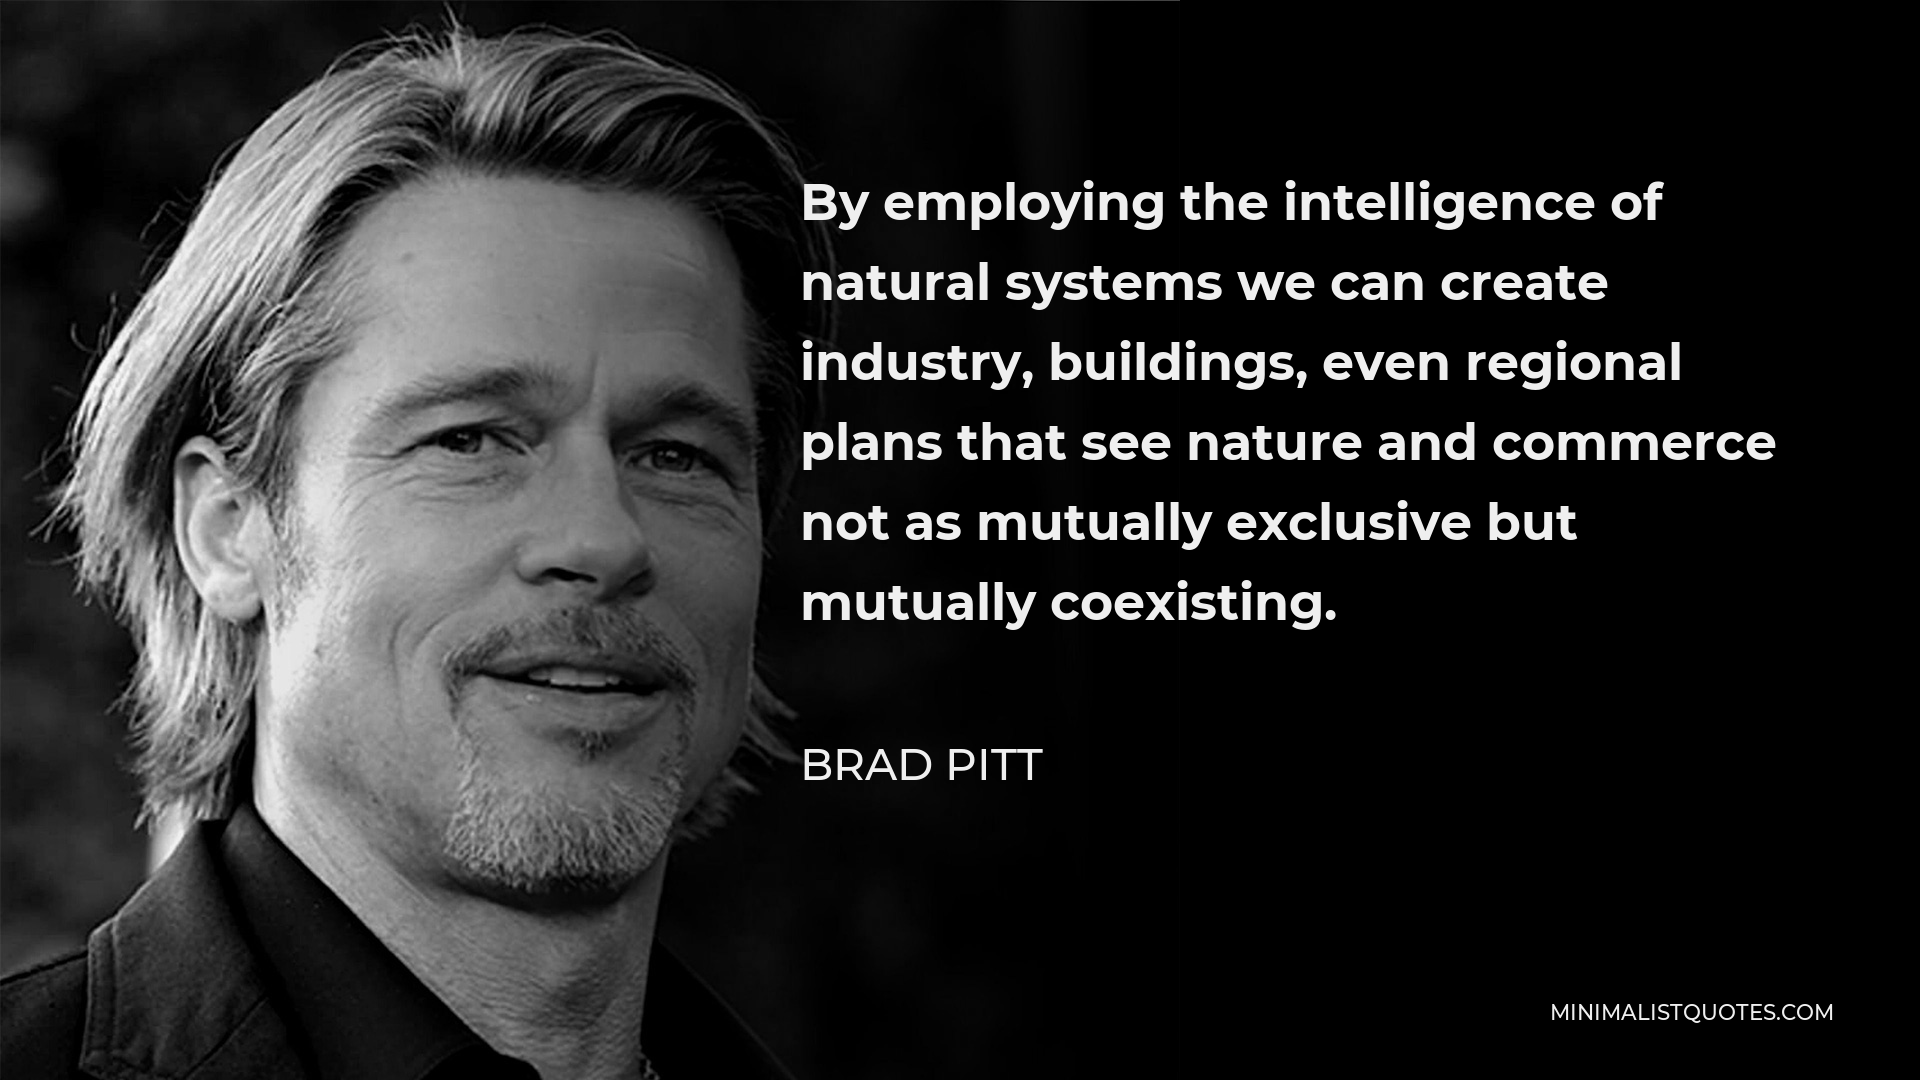 Brad Pitt Quote - By employing the intelligence of natural systems we can create industry, buildings, even regional plans that see nature and commerce not as mutually exclusive but mutually coexisting.